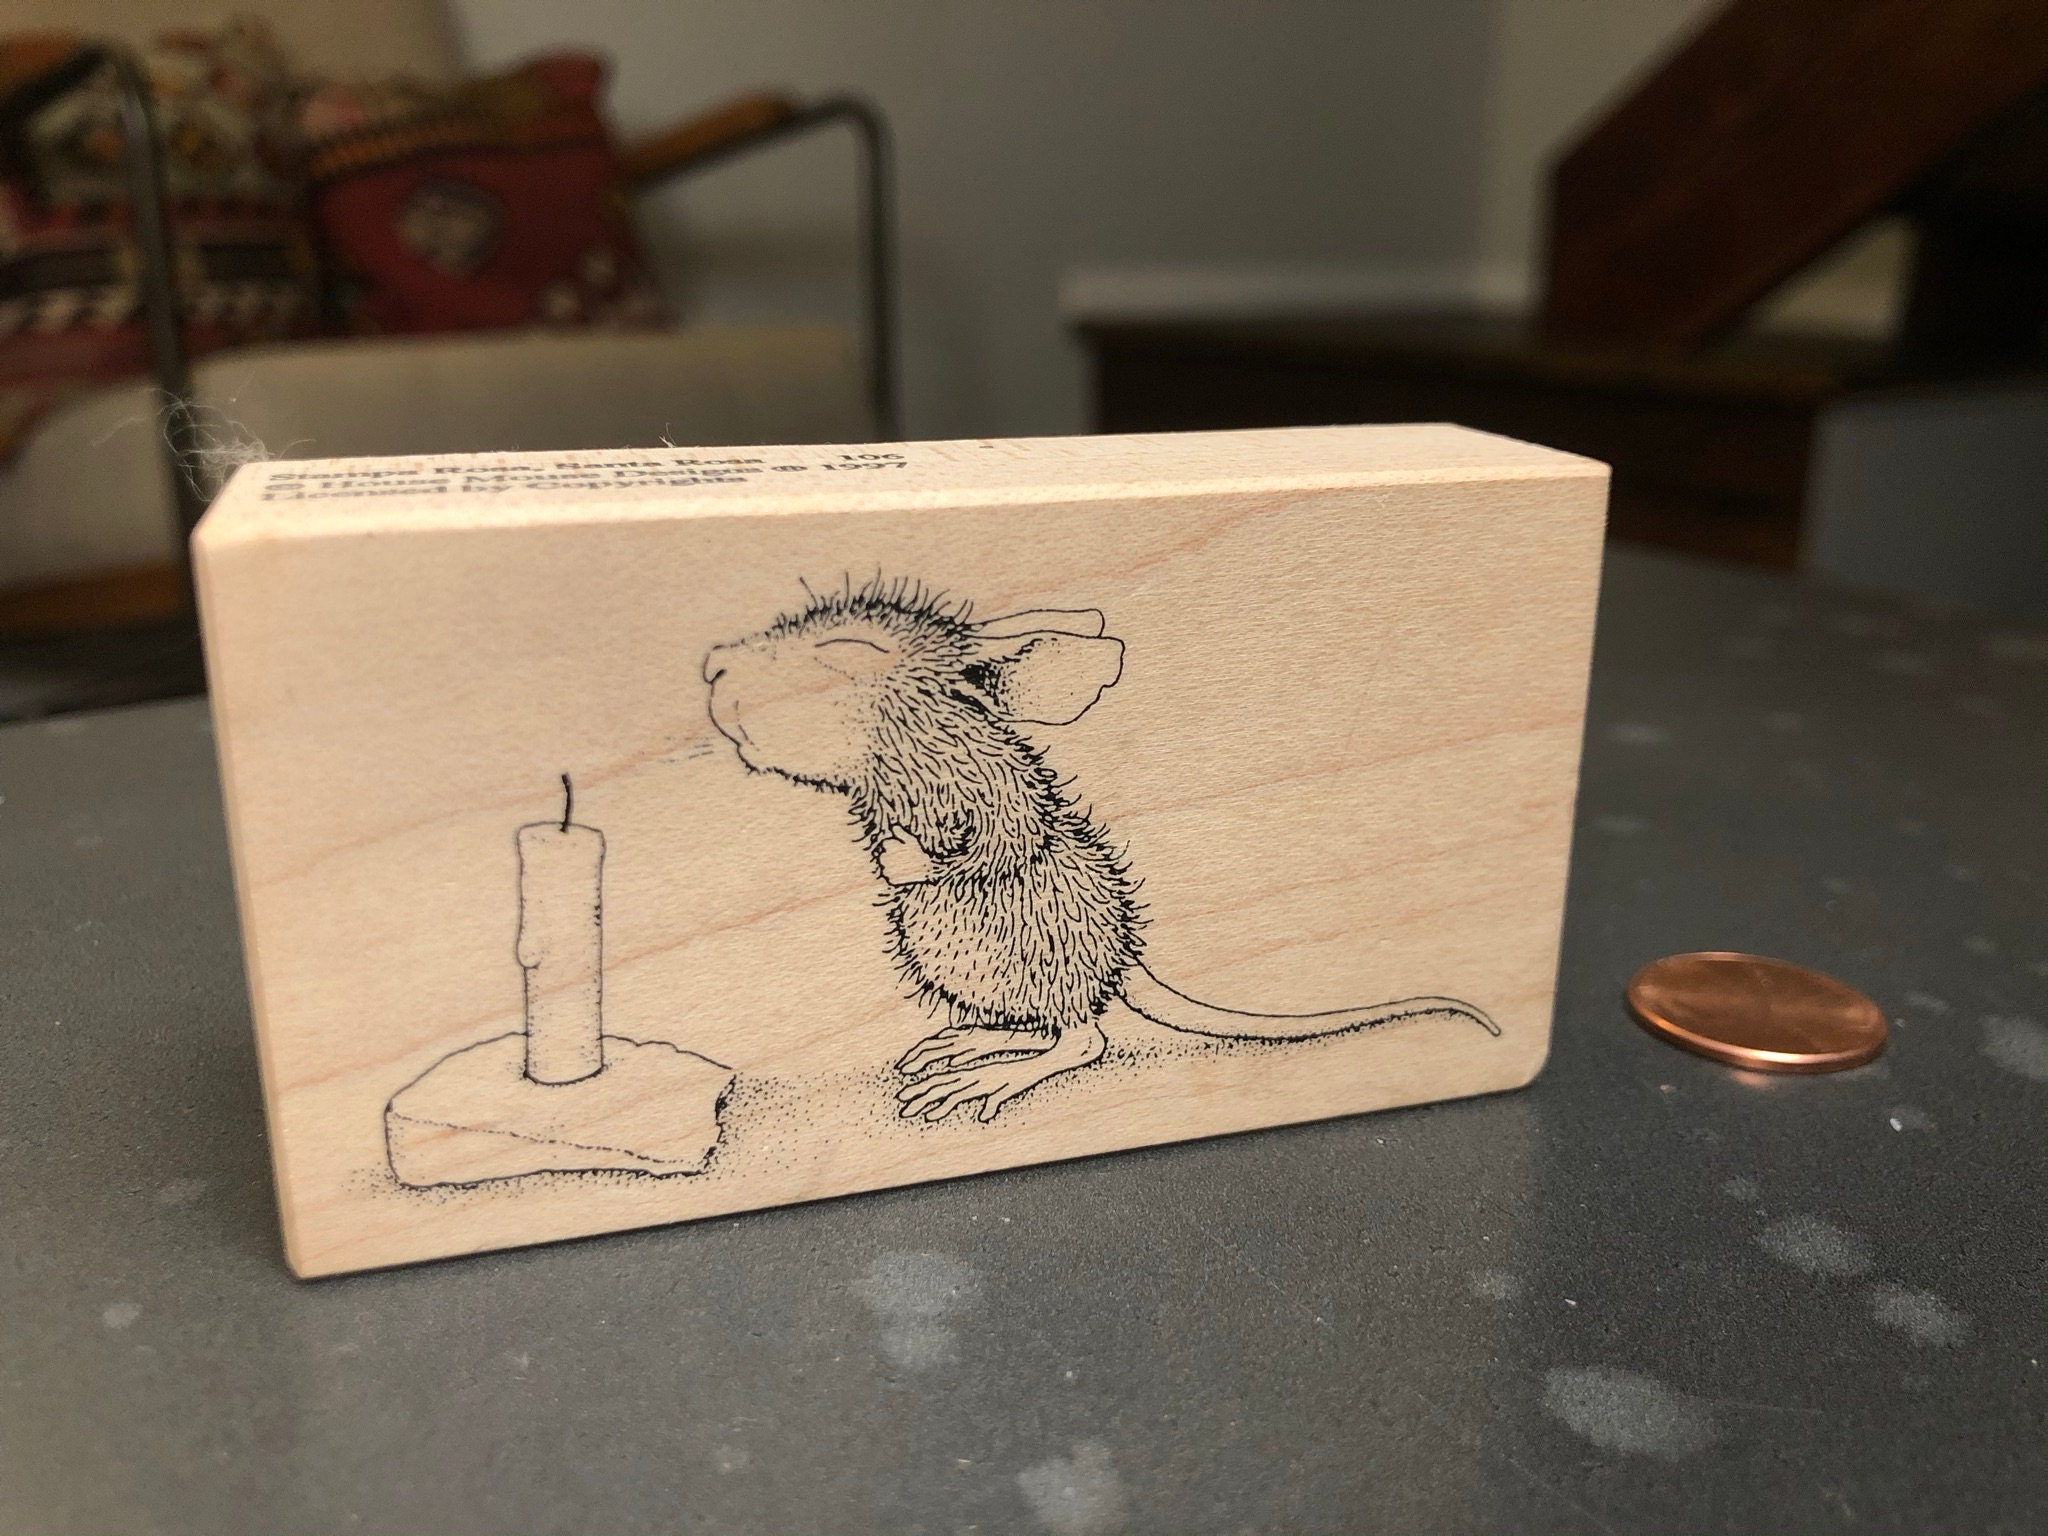 House Mouse SLEEPING WITH STRAWBERRIES House Mouse Designs Wood Mount Stamp Stampa Rosa 1997 